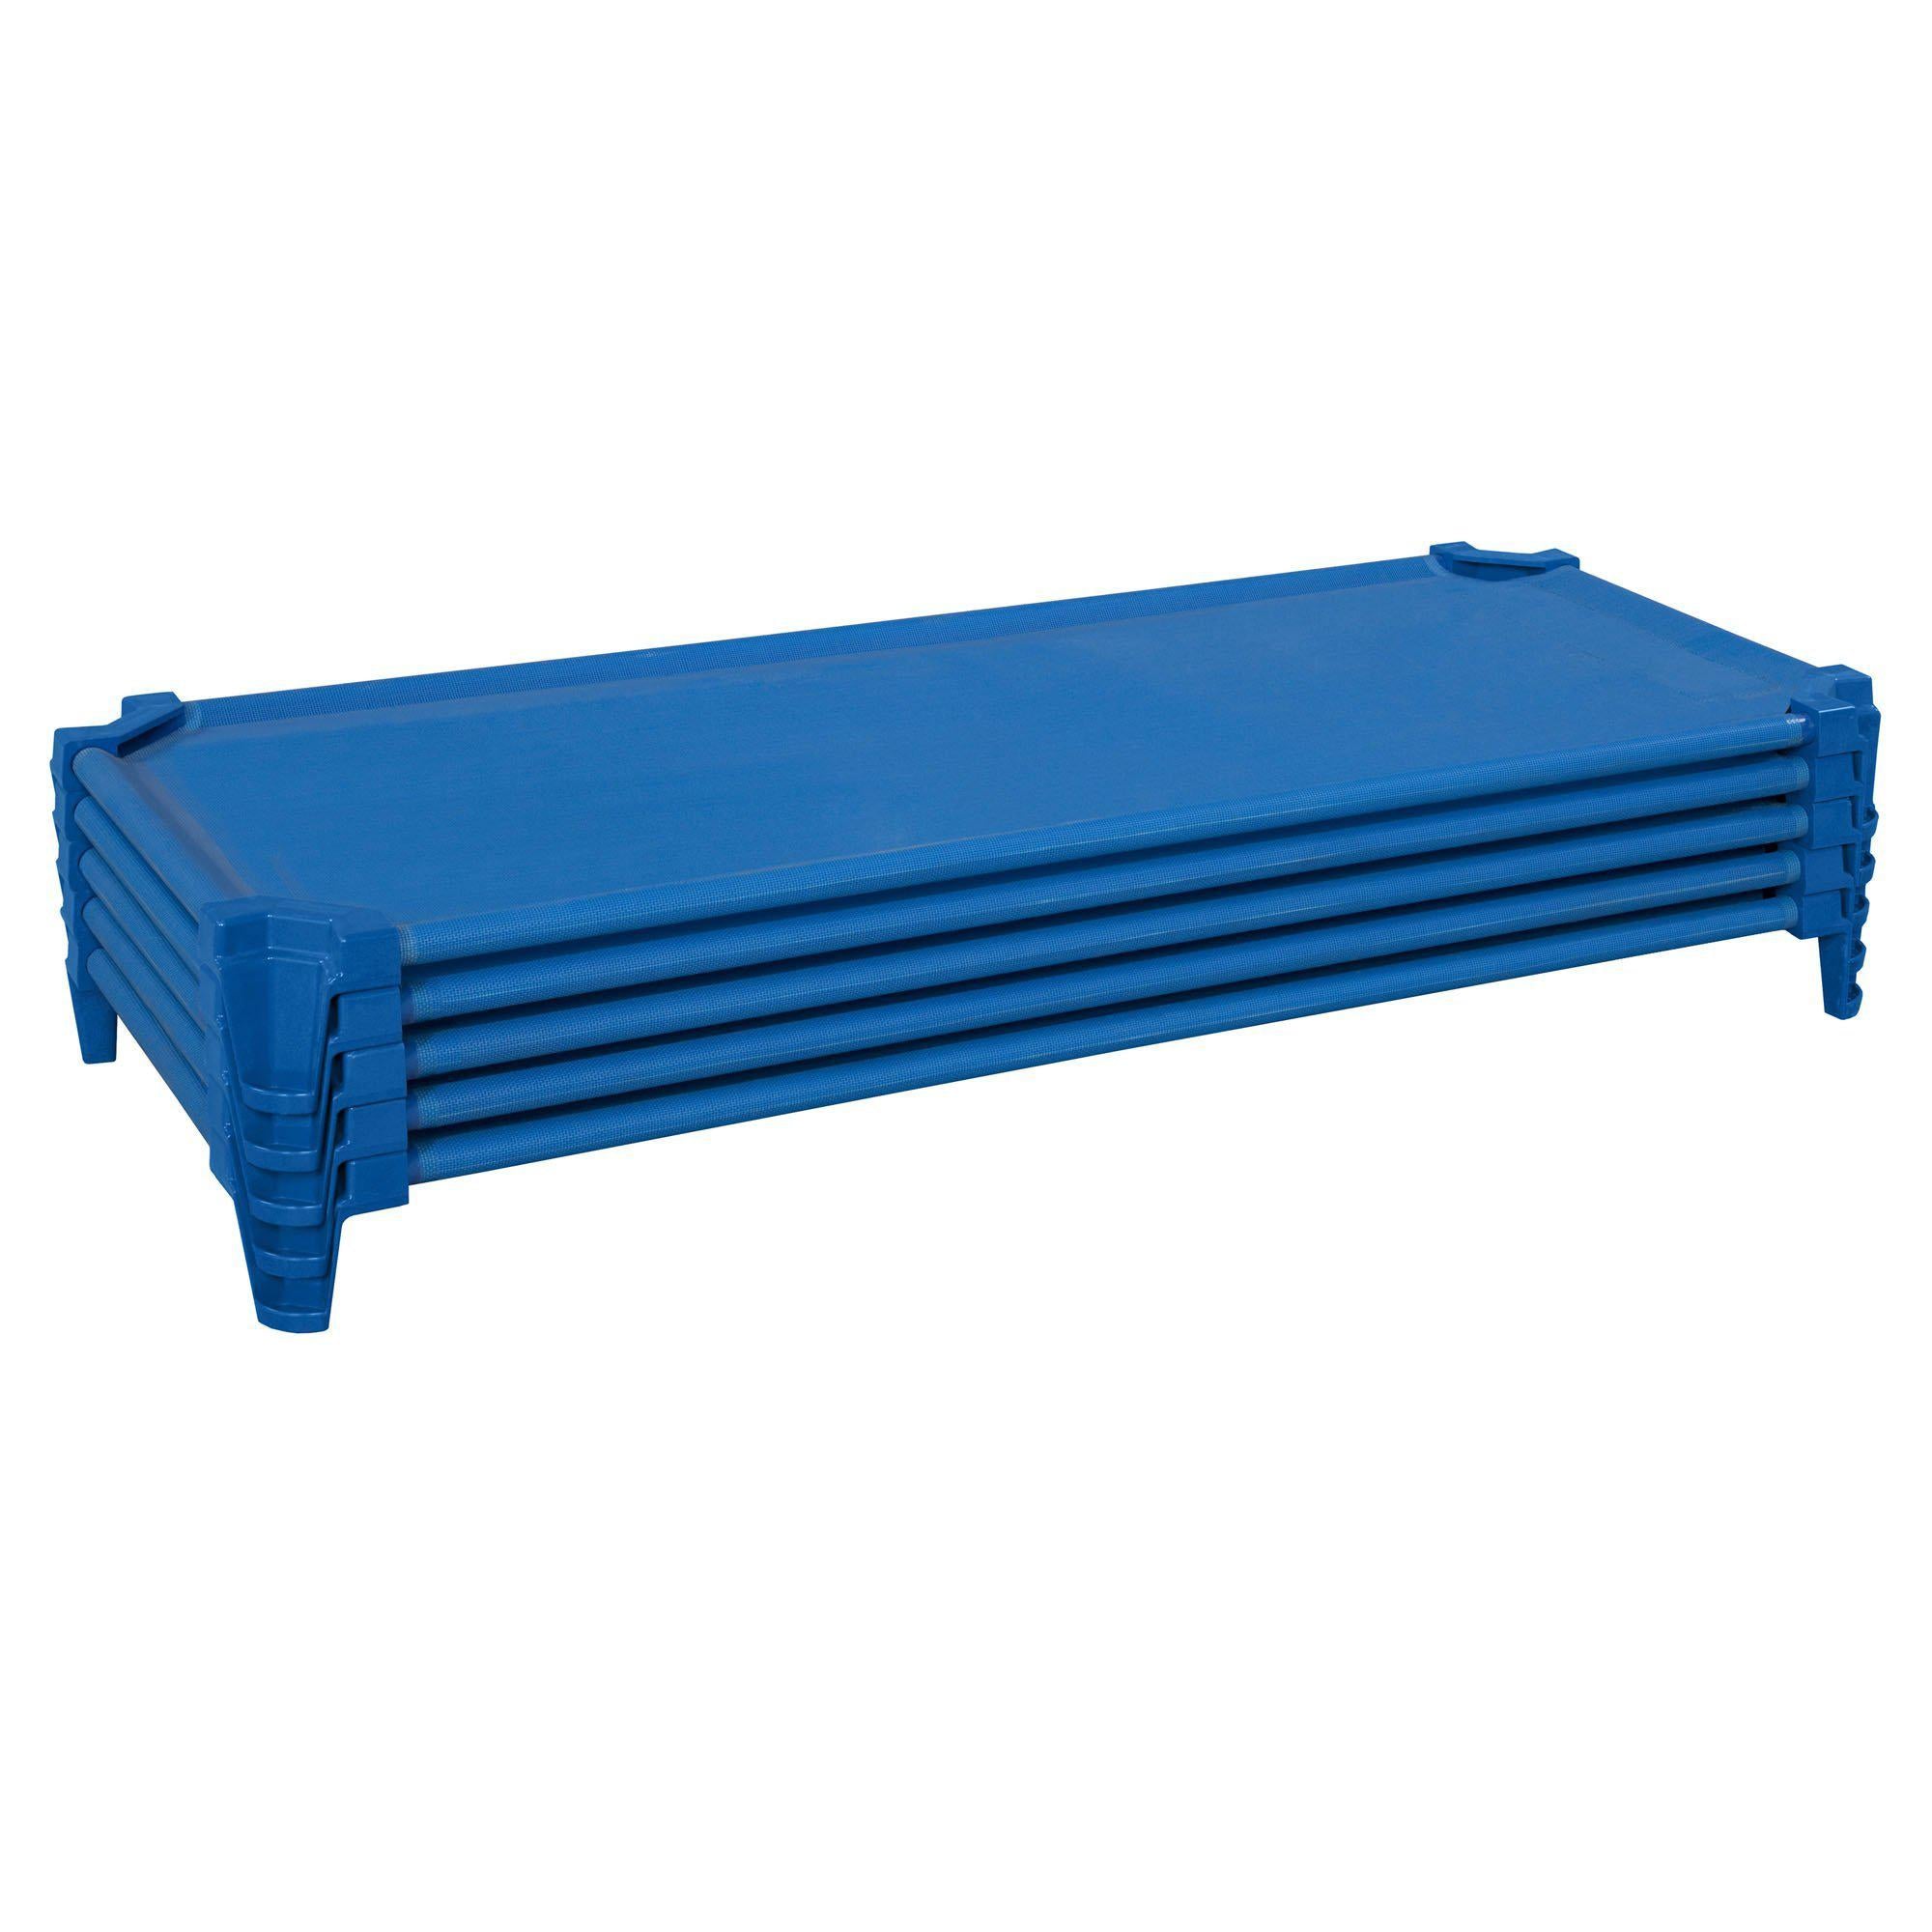 Incredible Cot Set of (5) Factory Assembled, Blue